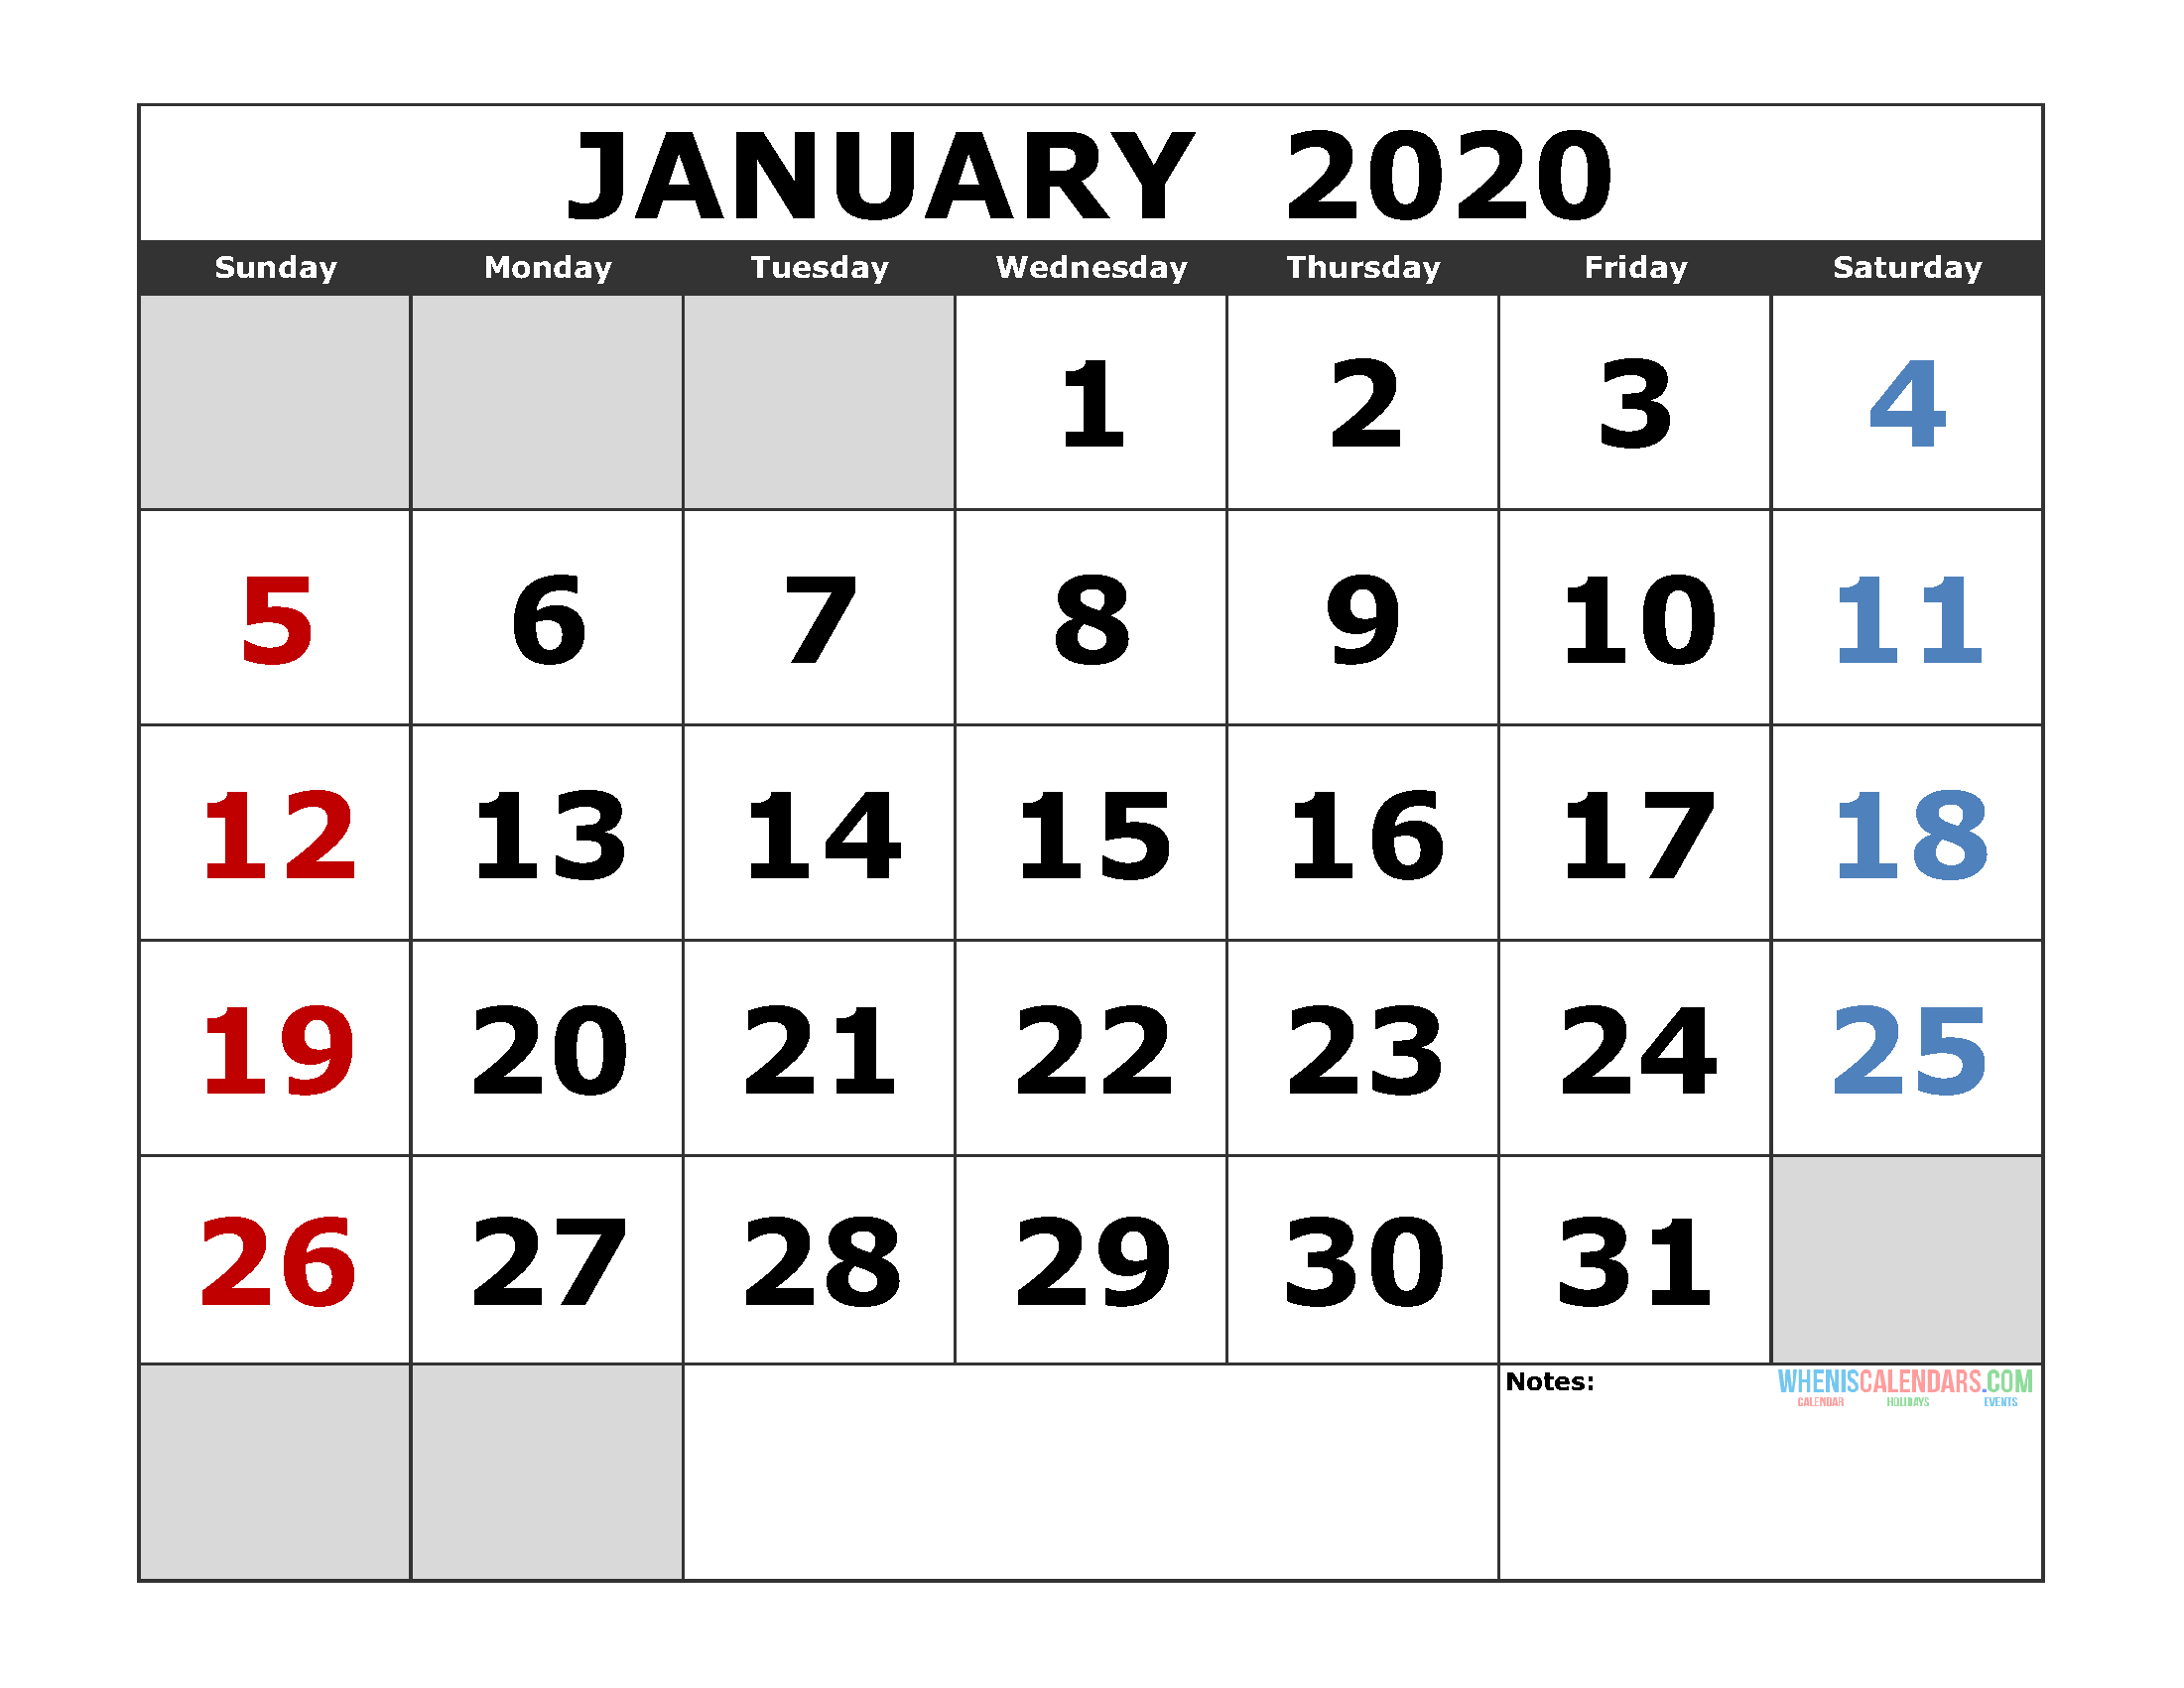 January 2020 Printable Calendar Template Excel, Pdf, Image intended for January 2020 Calendar Png